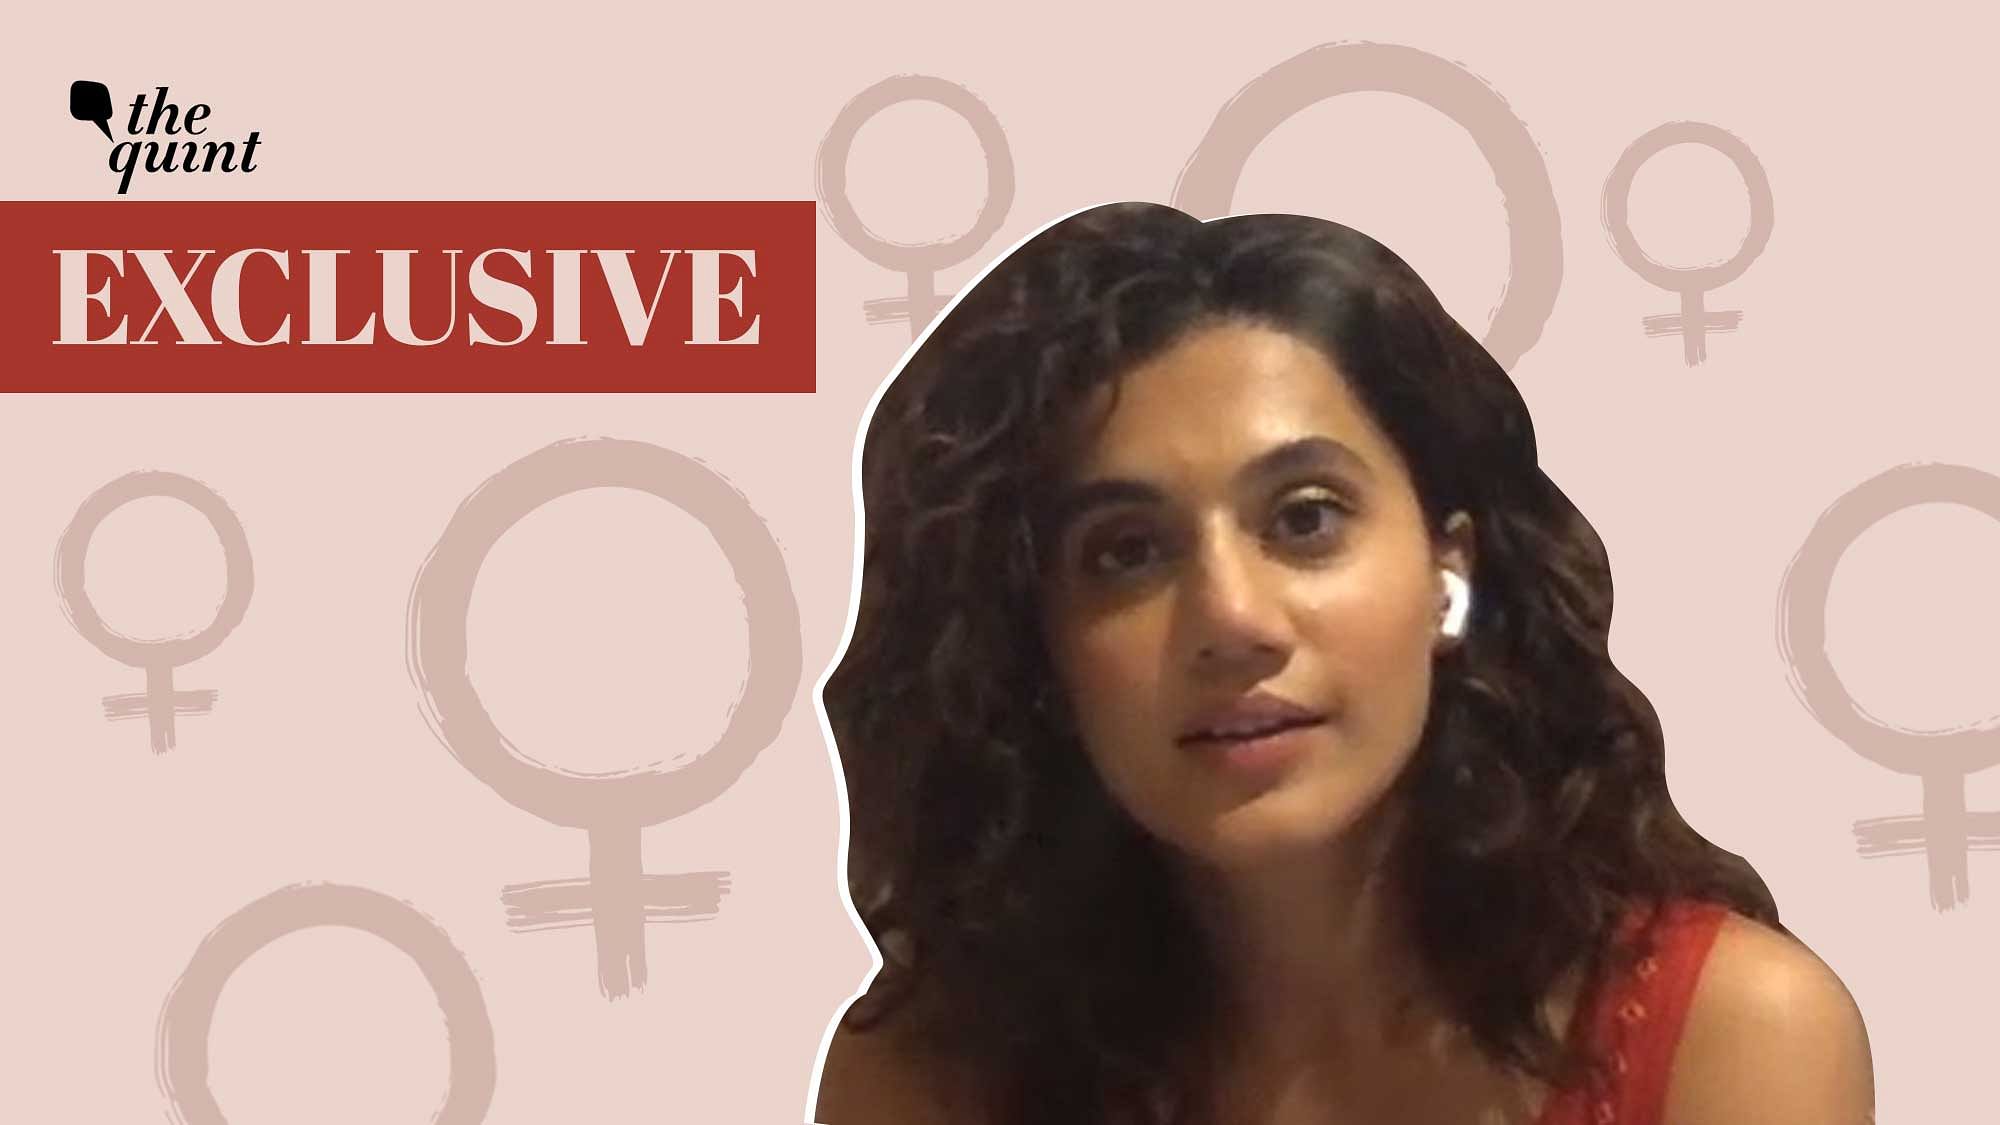 Taapsee Pannu in a candid chat with <b>The Quint</b>.